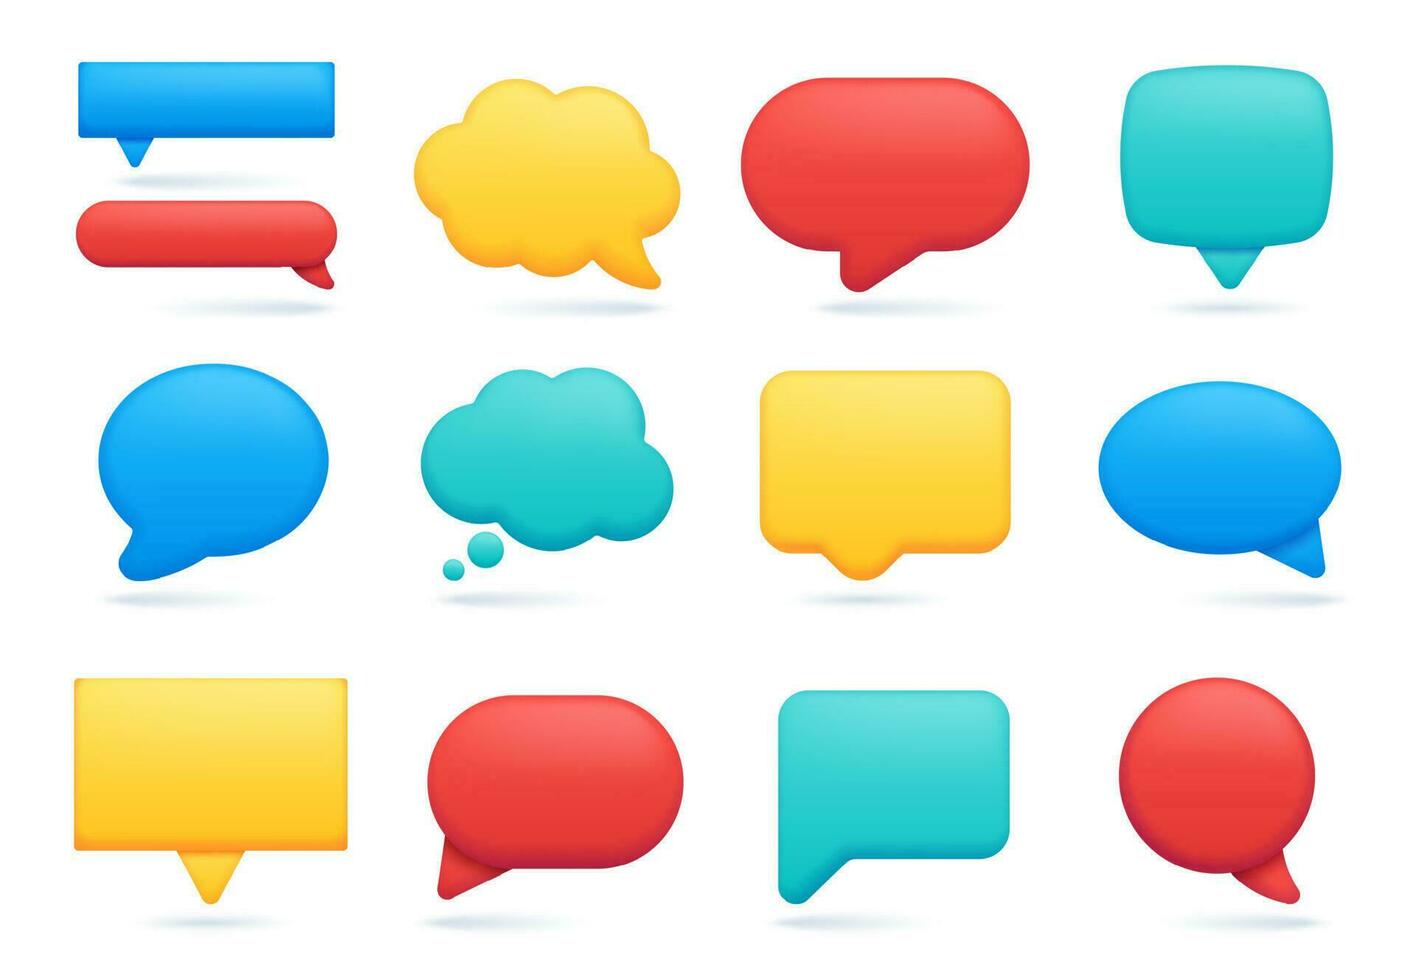 3d speech bubble icon, empty chat message or comment. Realistic talking and thinking balloon, social media text notification bubbles vector set